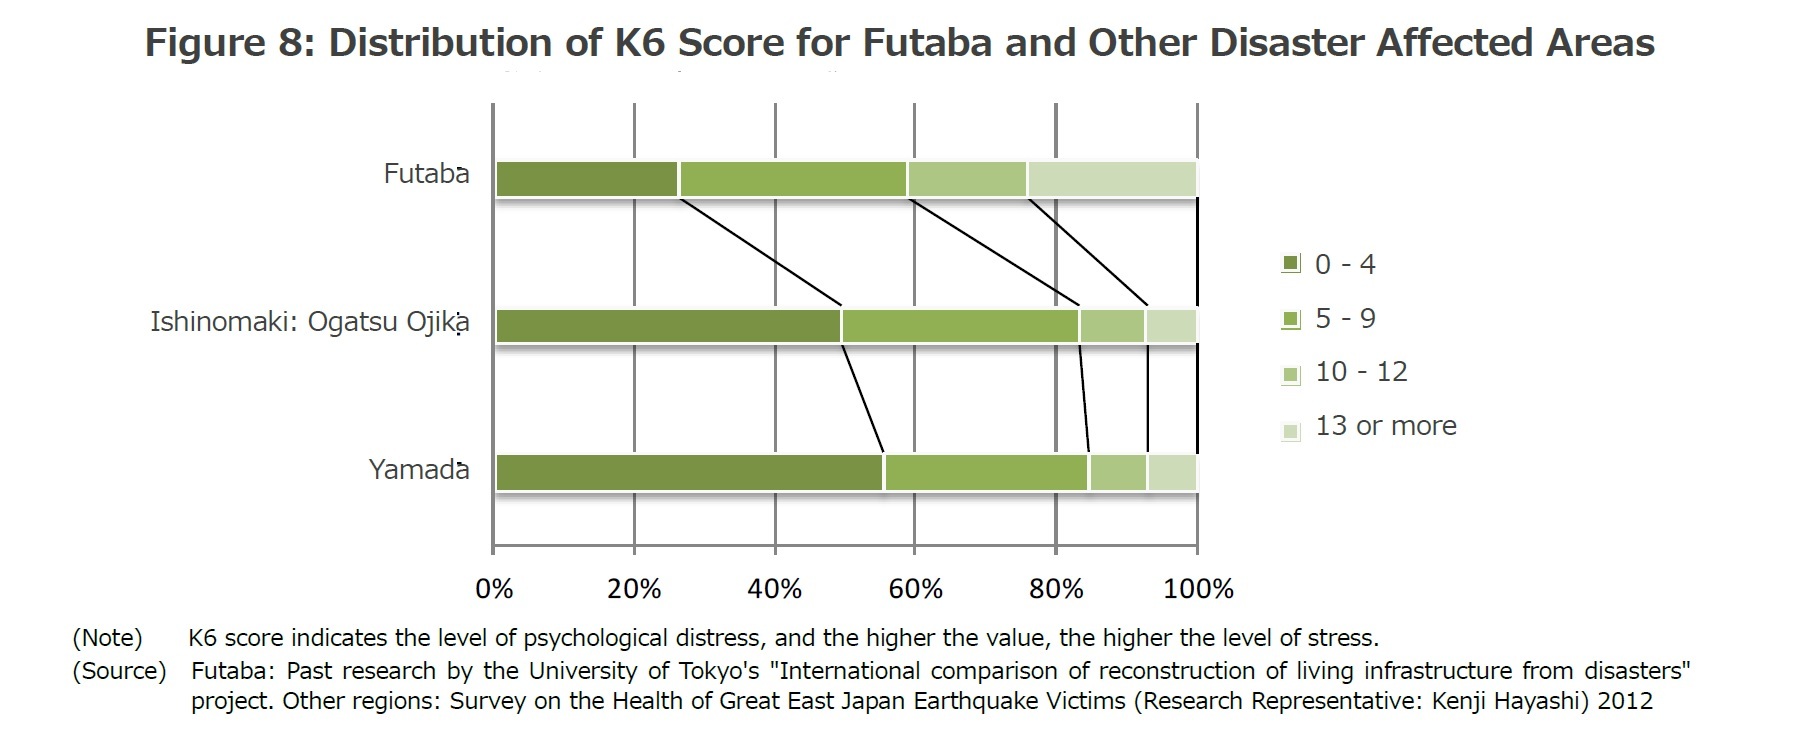 Figure 8: Distribution of K6 Score for Futaba and Other Disaster Affected Areas